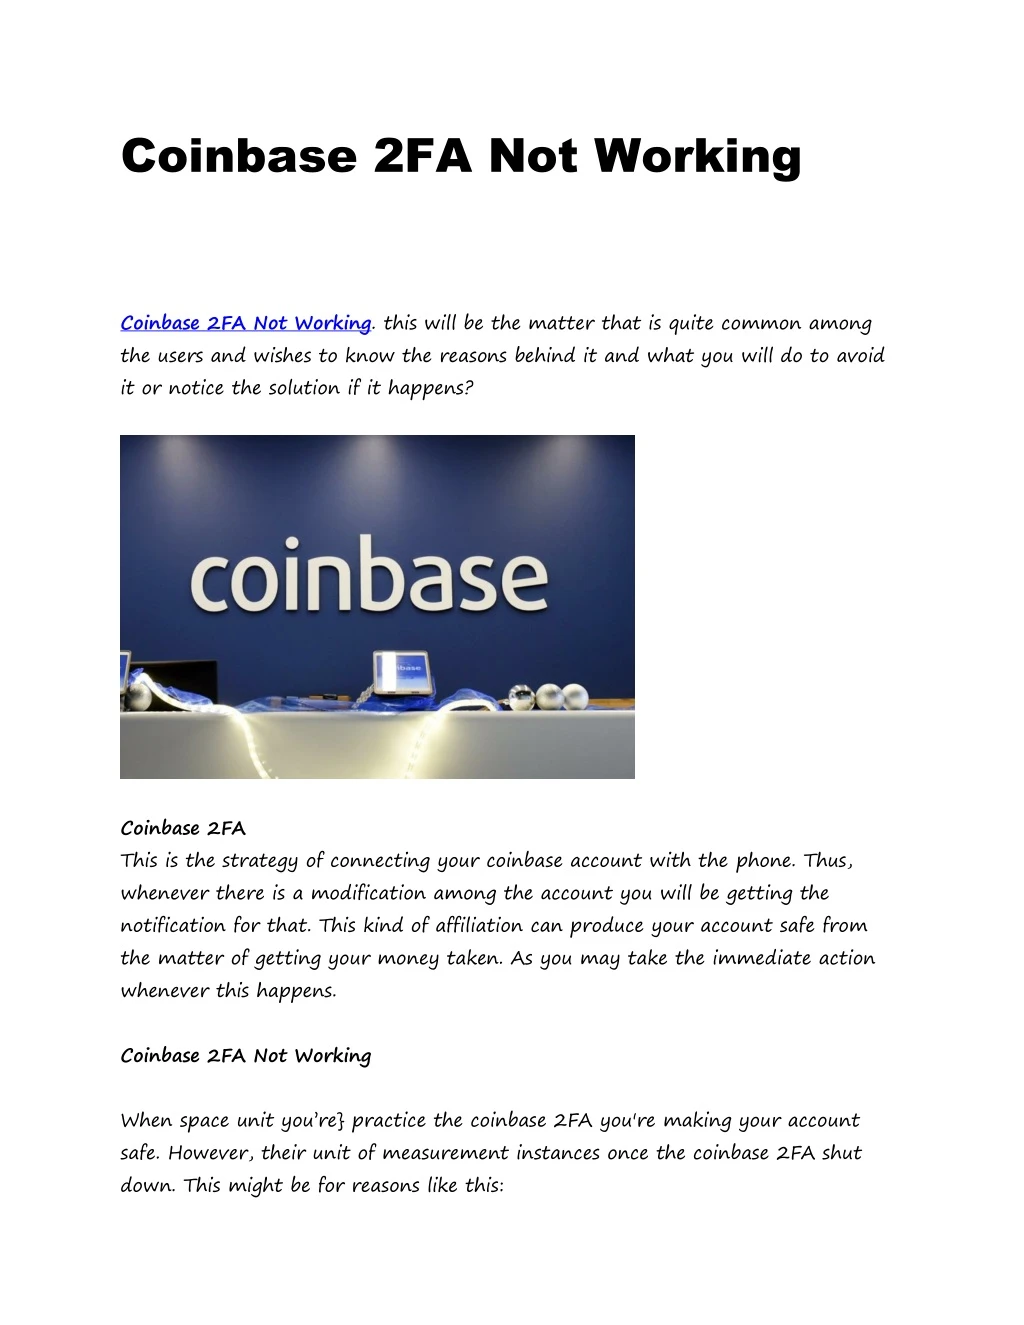 coinbase 2fa not working